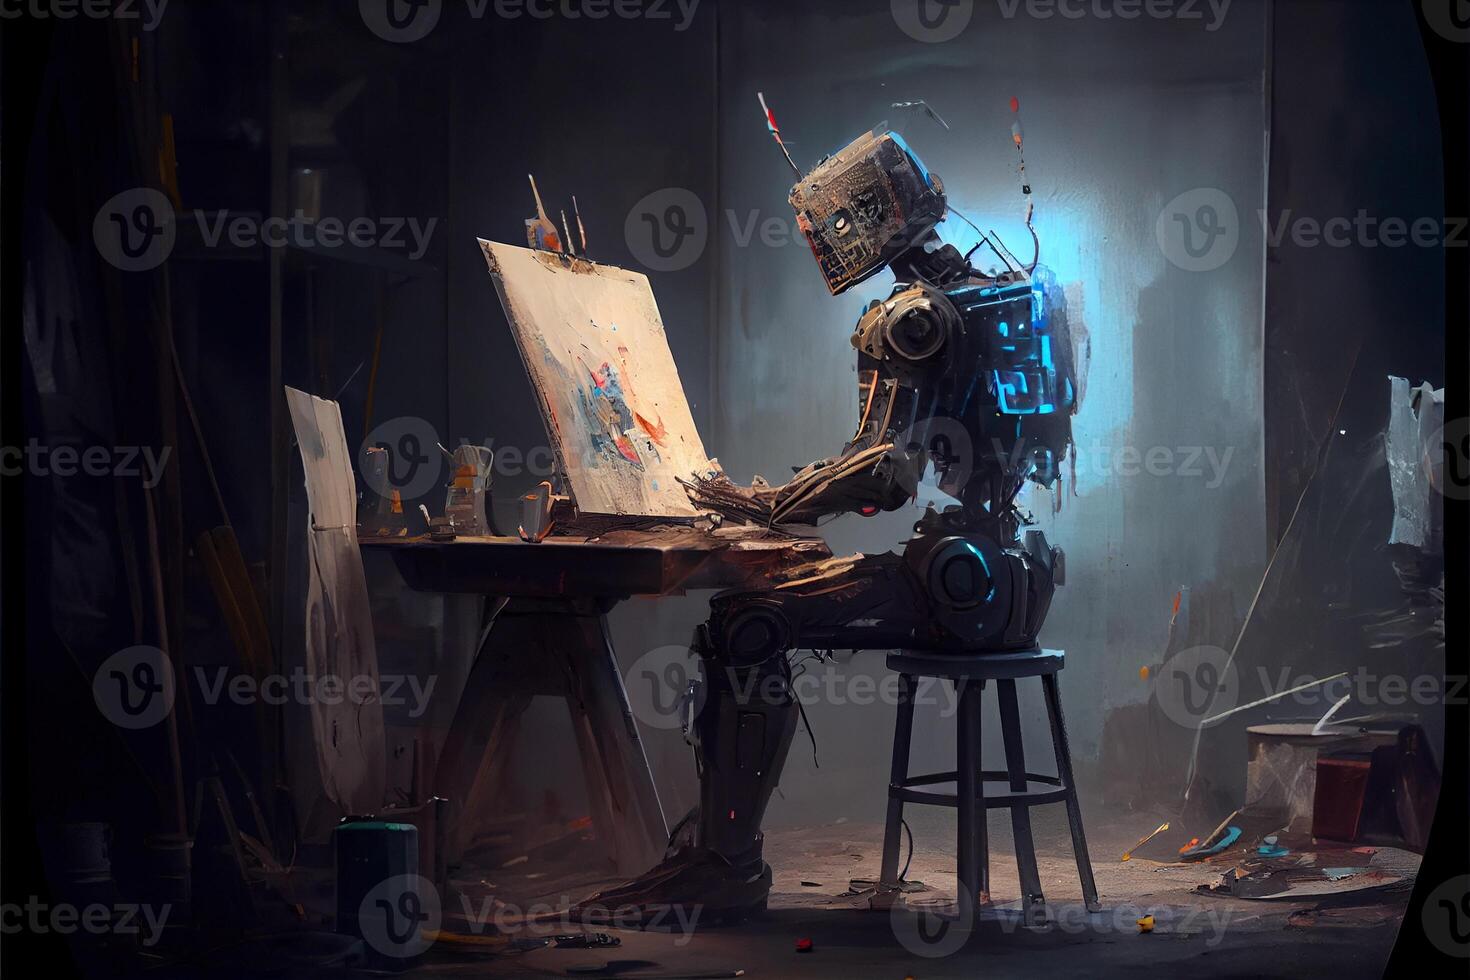 illustration of Cyborg Ai robot artist in dark studio next to his easel, painting and paints while working, neural network generated art. Digitally painting, generated image. photo